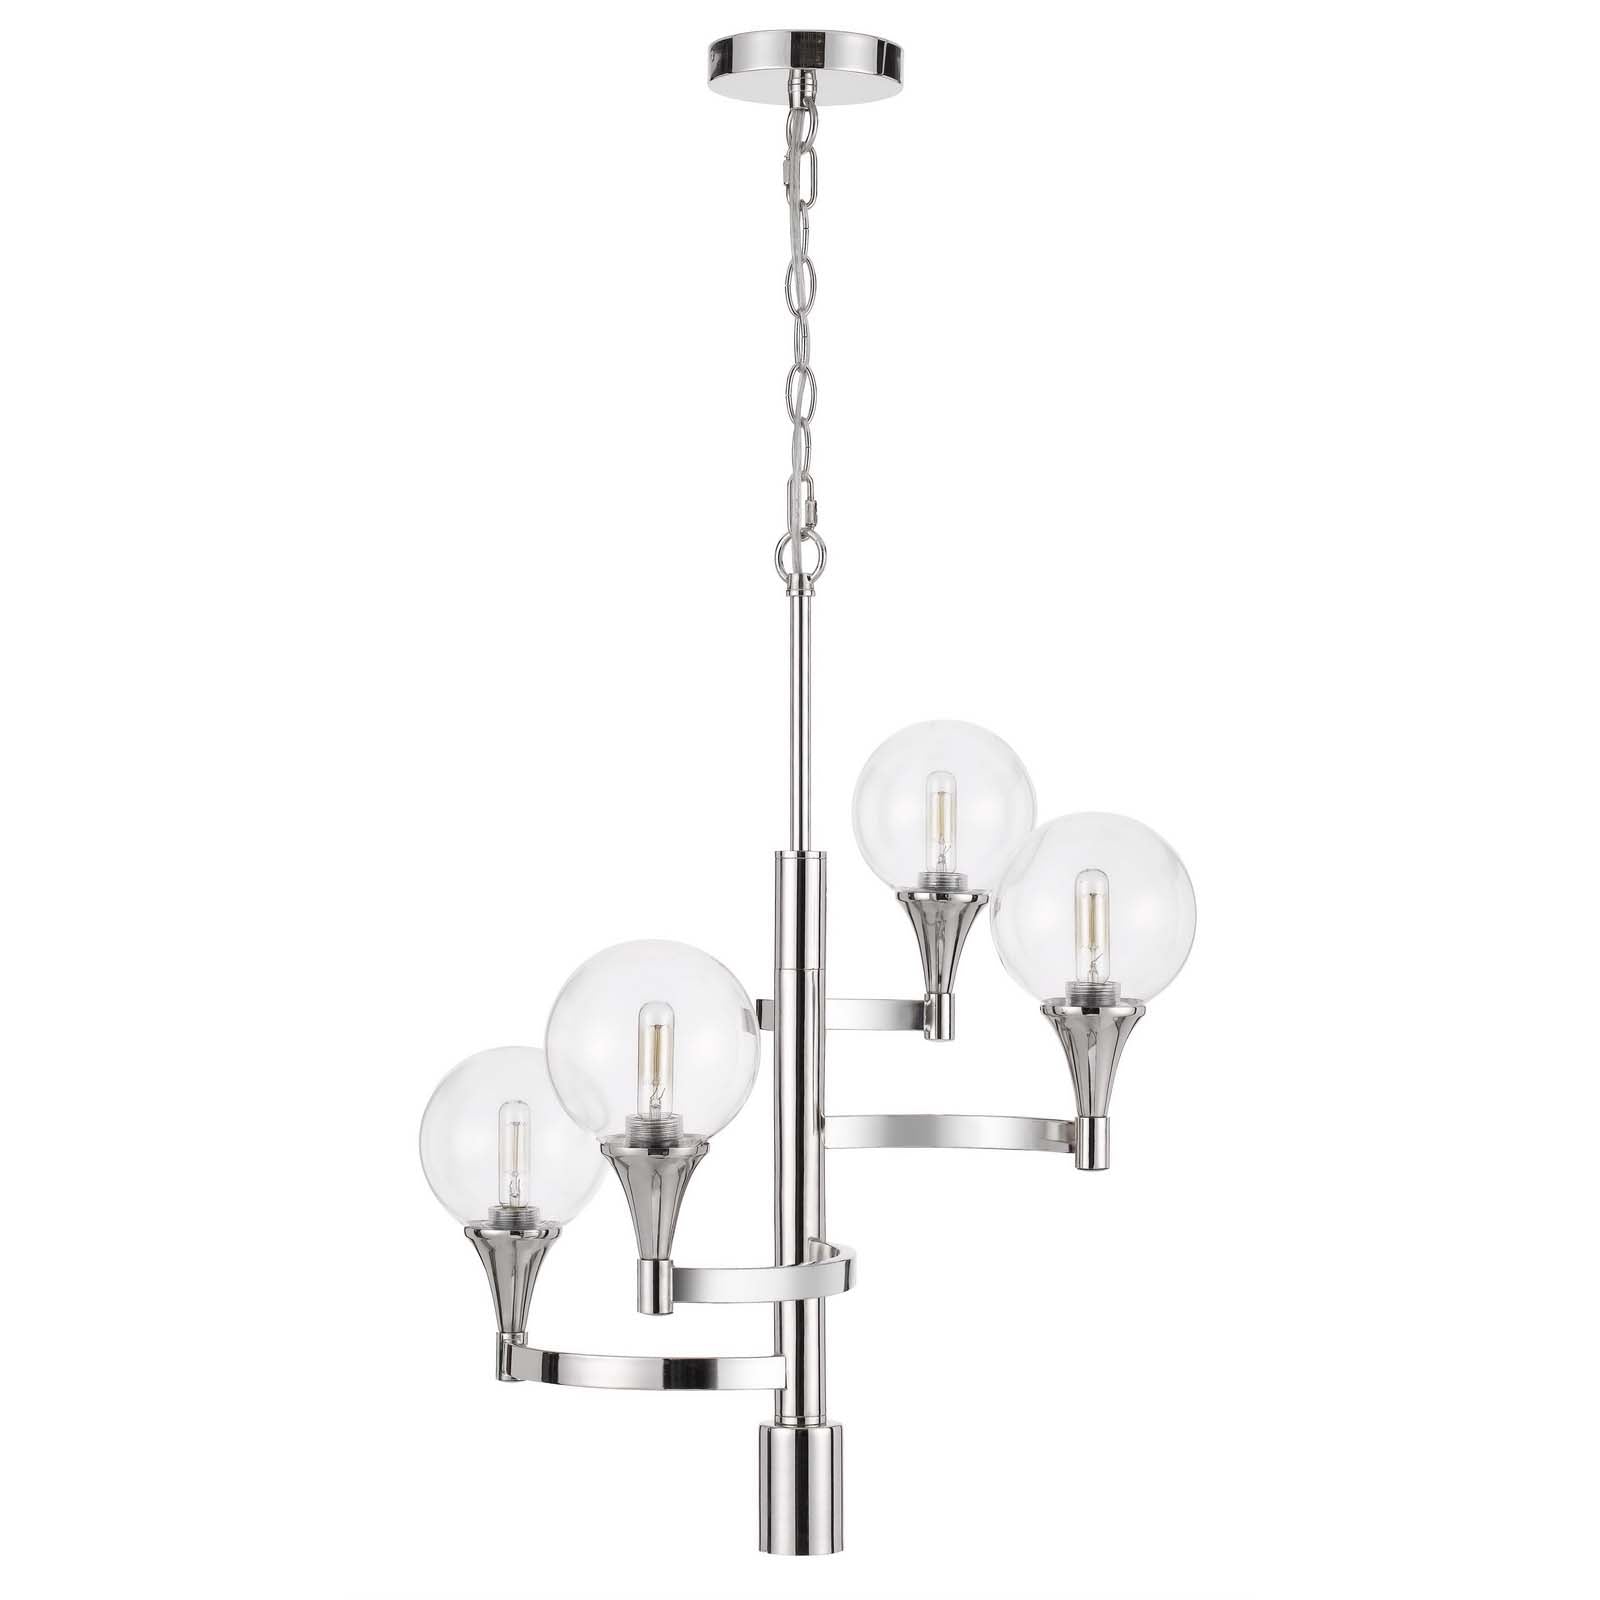 15W X 4 Milbank Metal Chandelier With A 3K Gu10 Led 6W Downlight (Bulb Included) Clear Round Glass Shades